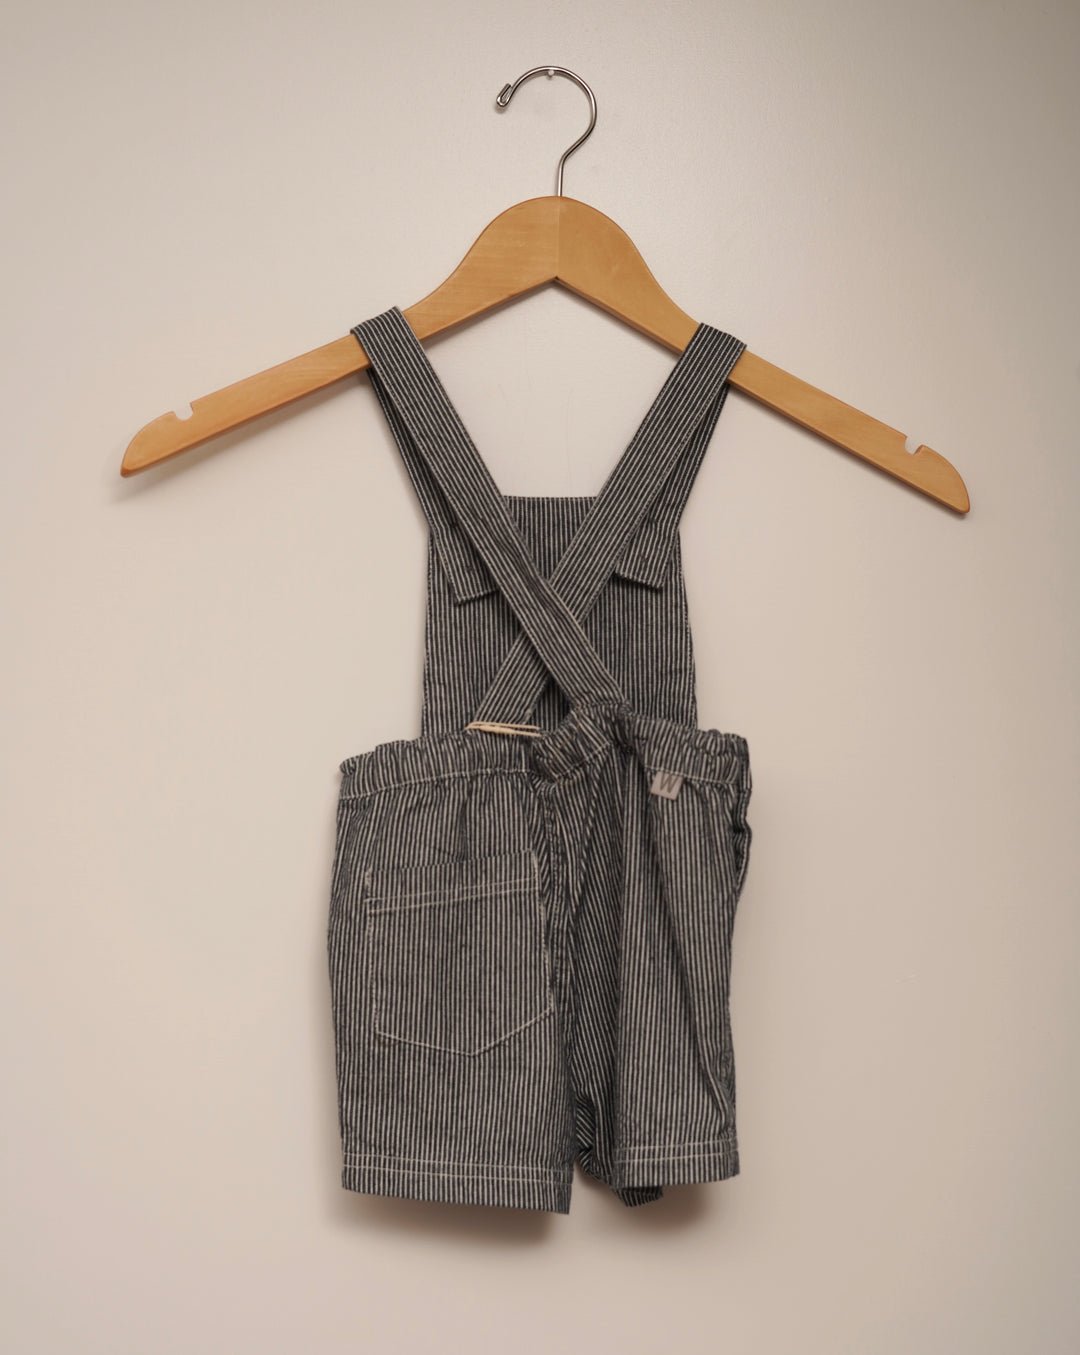 Wheat Short Overalls, NWT, 12 Months